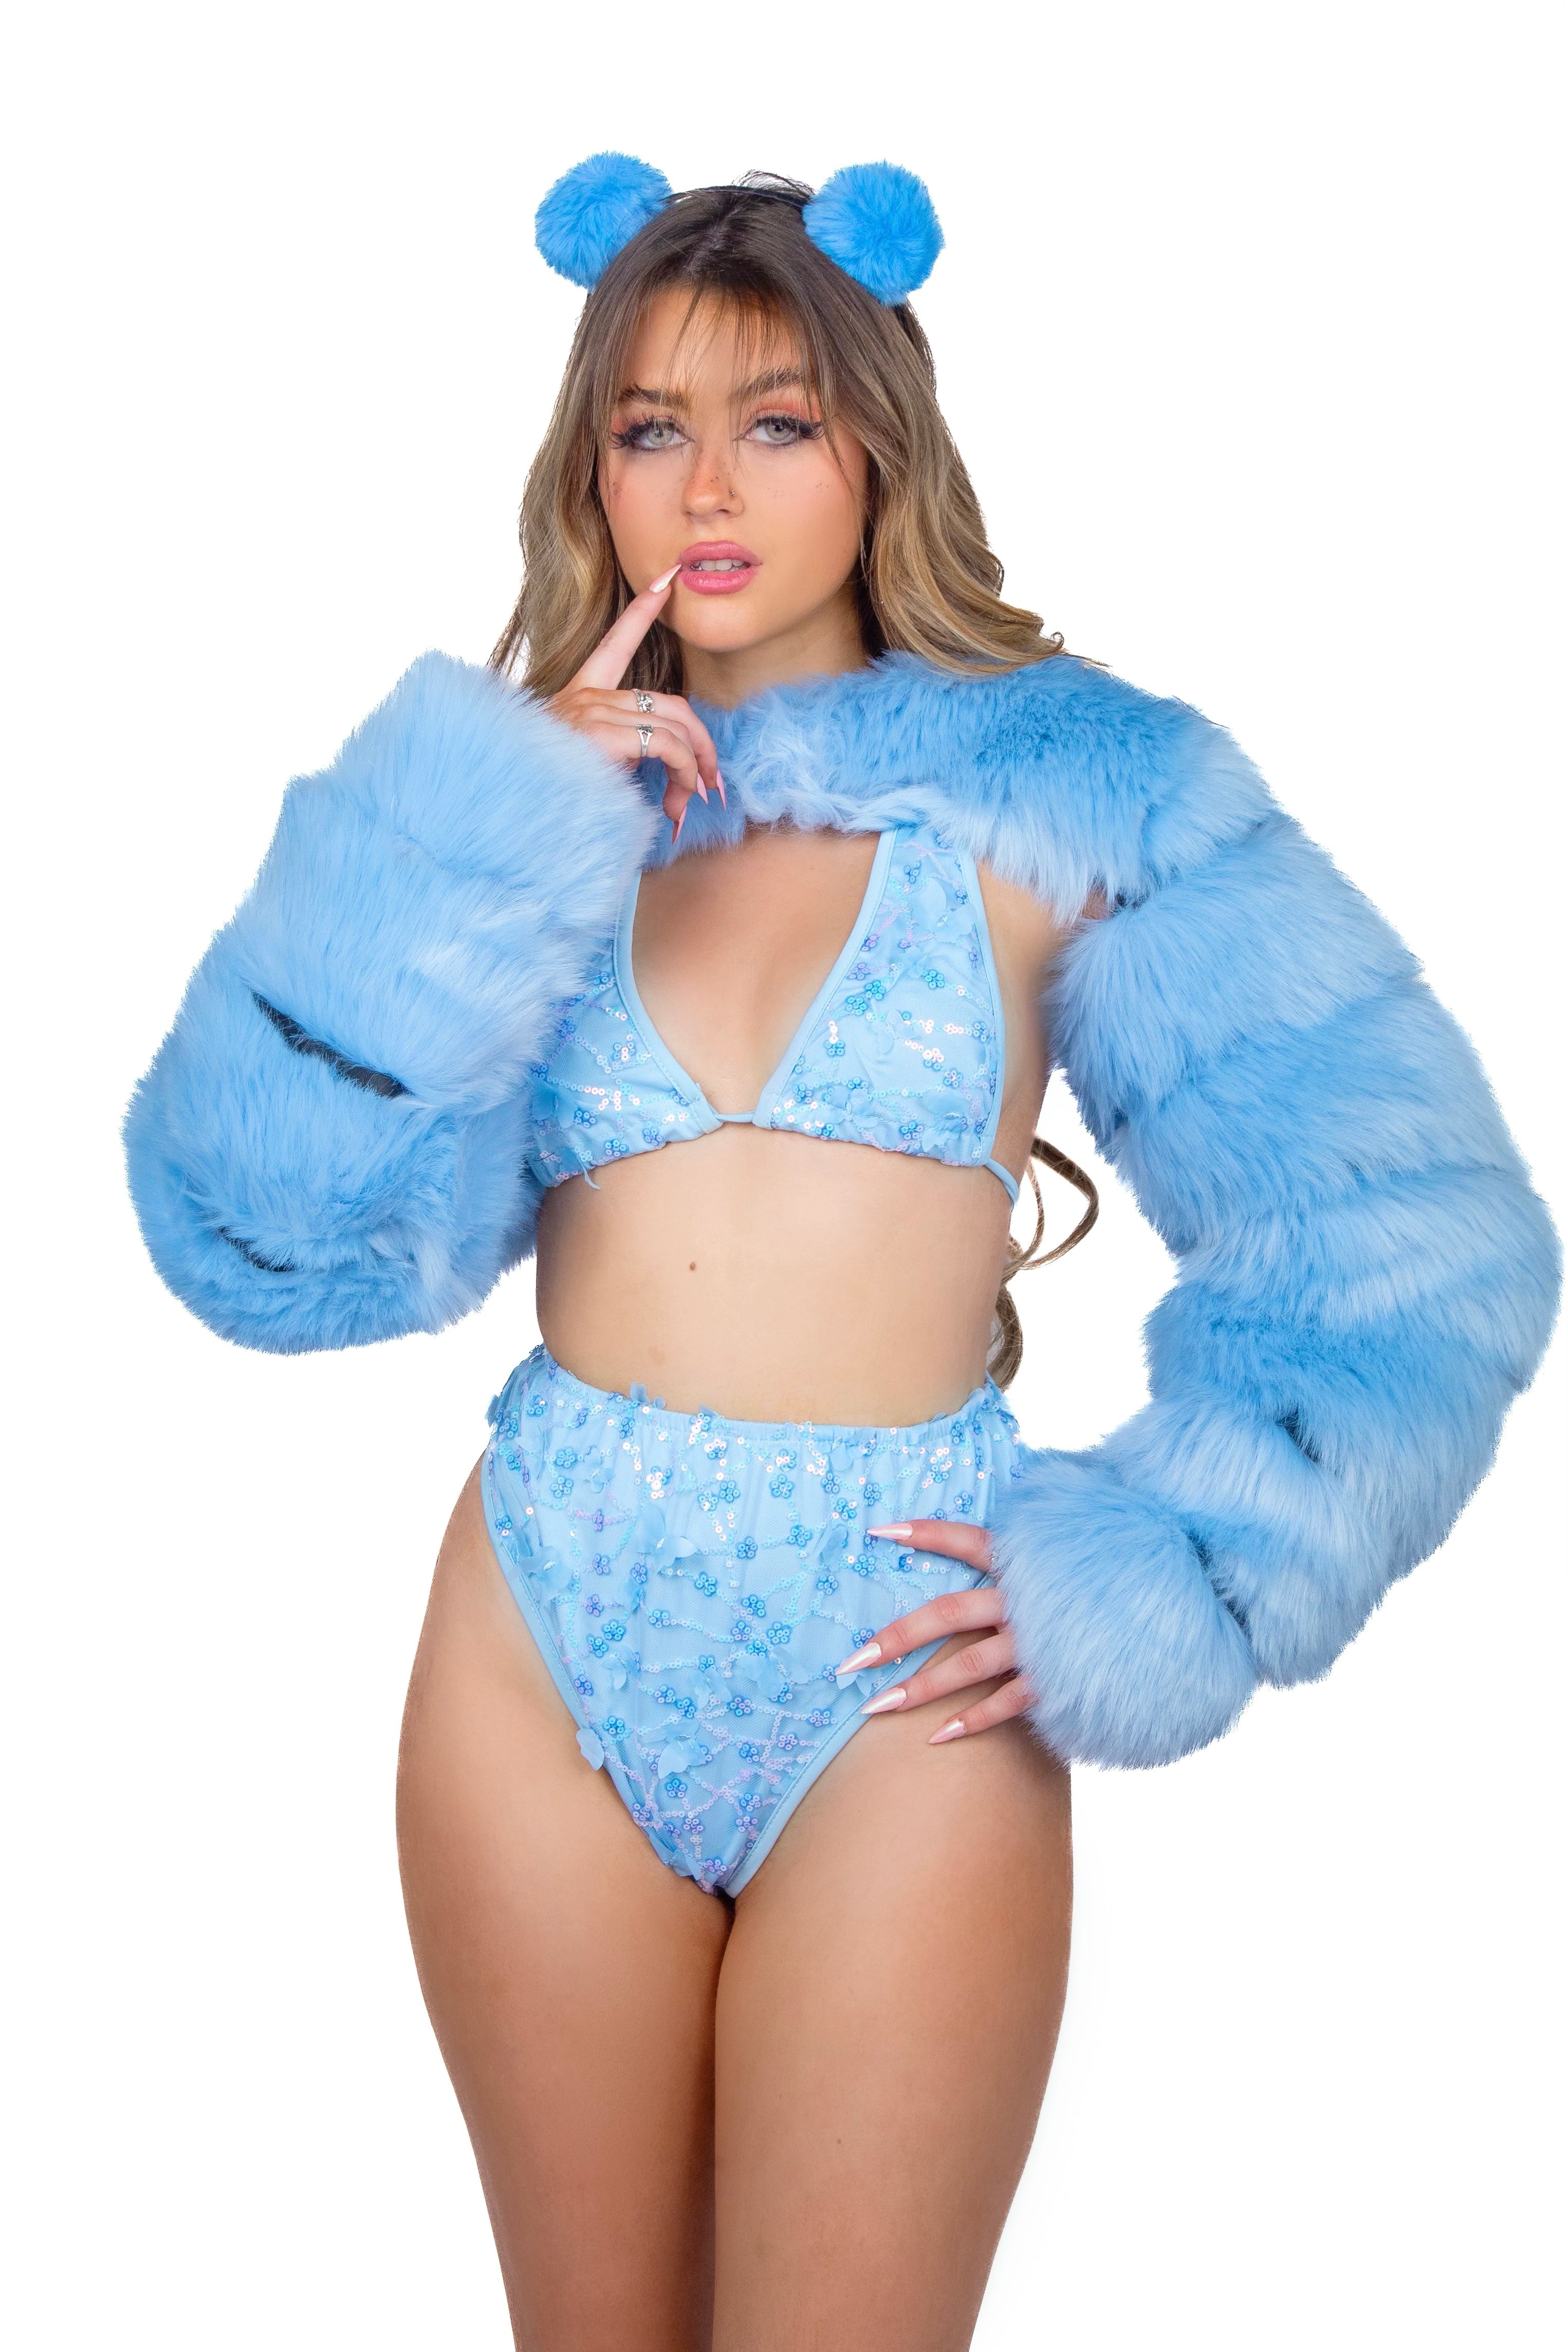 FULL OUTFIT- Bedtime Care Bear